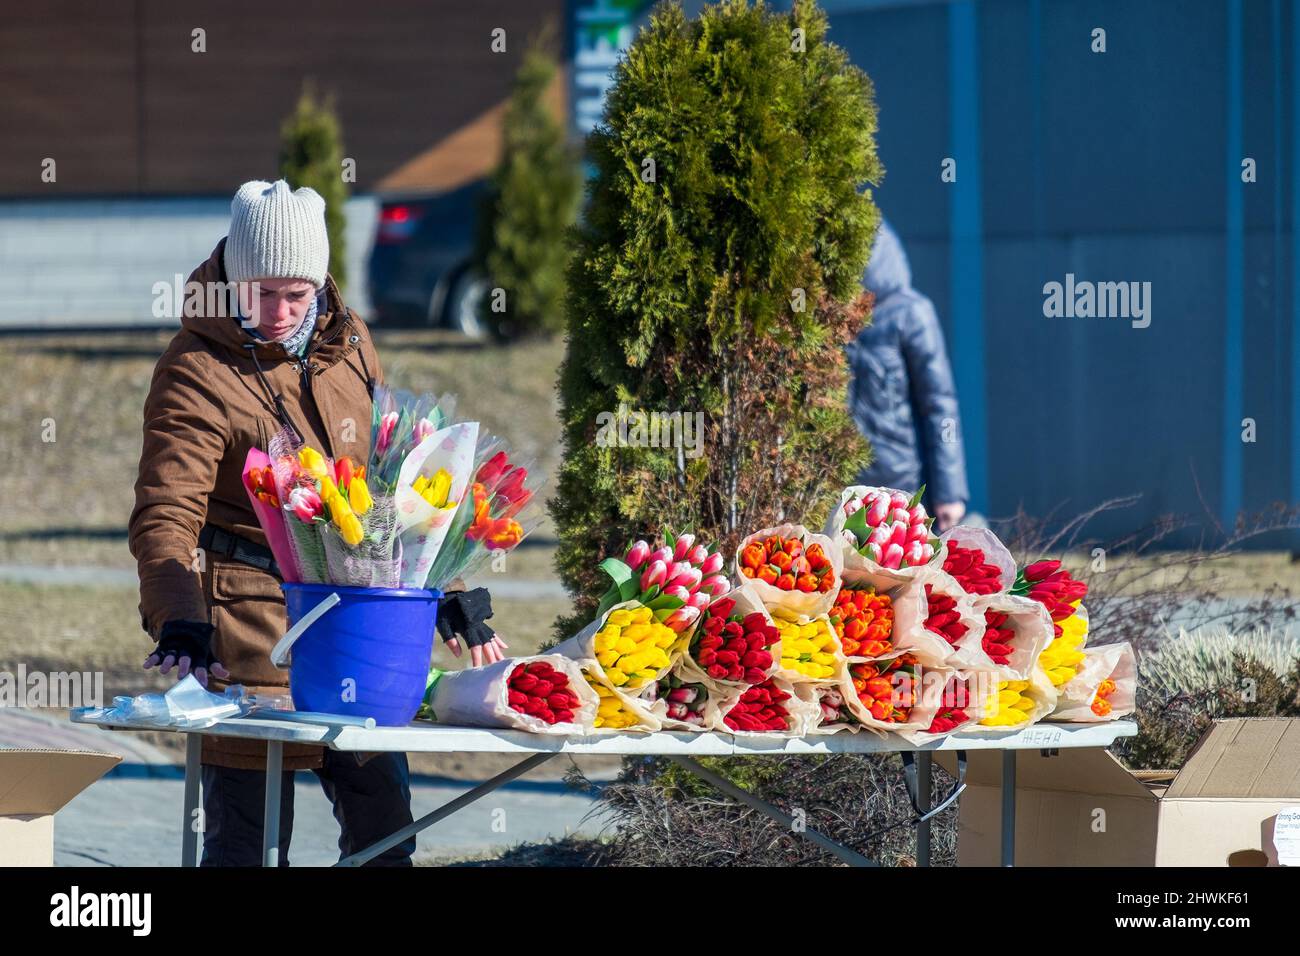 MINSK, BELARUS - MARCH 05, 2022: A woman sells flowers (tulips) on the street. The International Women's Day holiday is March 8. Stock Photo